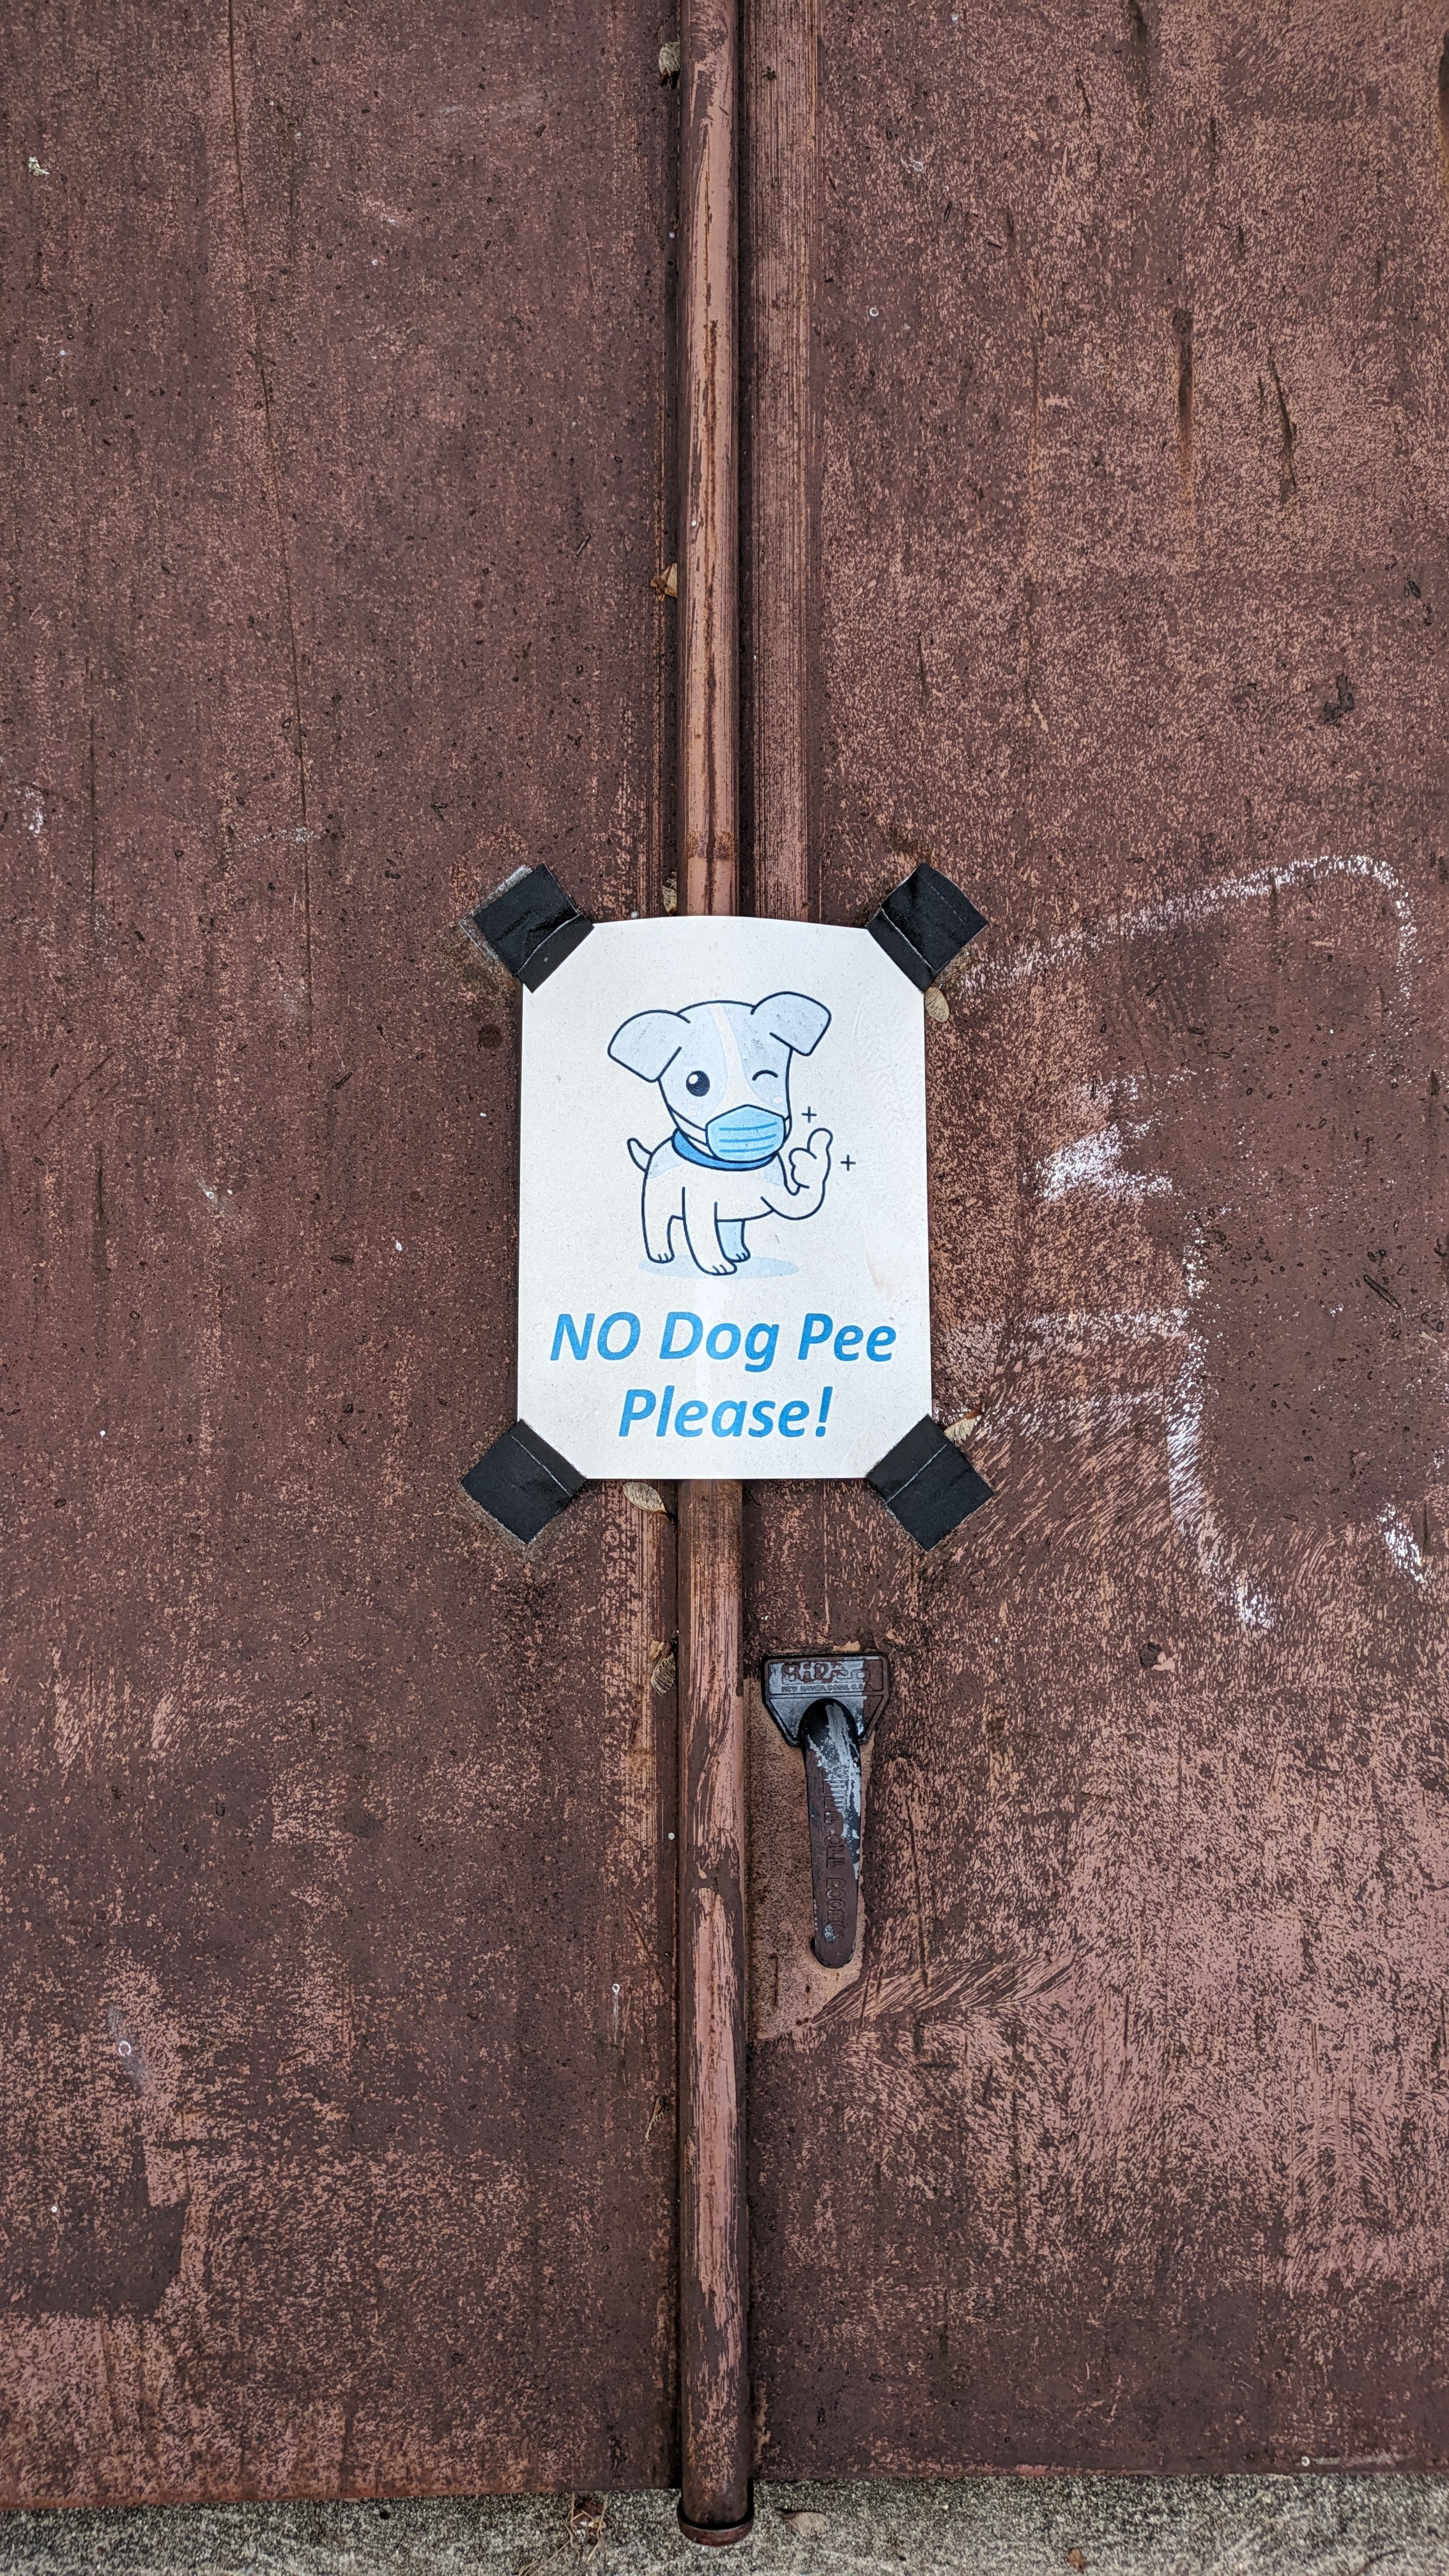 Photograph of the same basement doors with a different sign taped to it, this one featuring a cartoon dog wearing a surgical mask and giving a thumbs up, and text that reads NO Dog Pee Please!